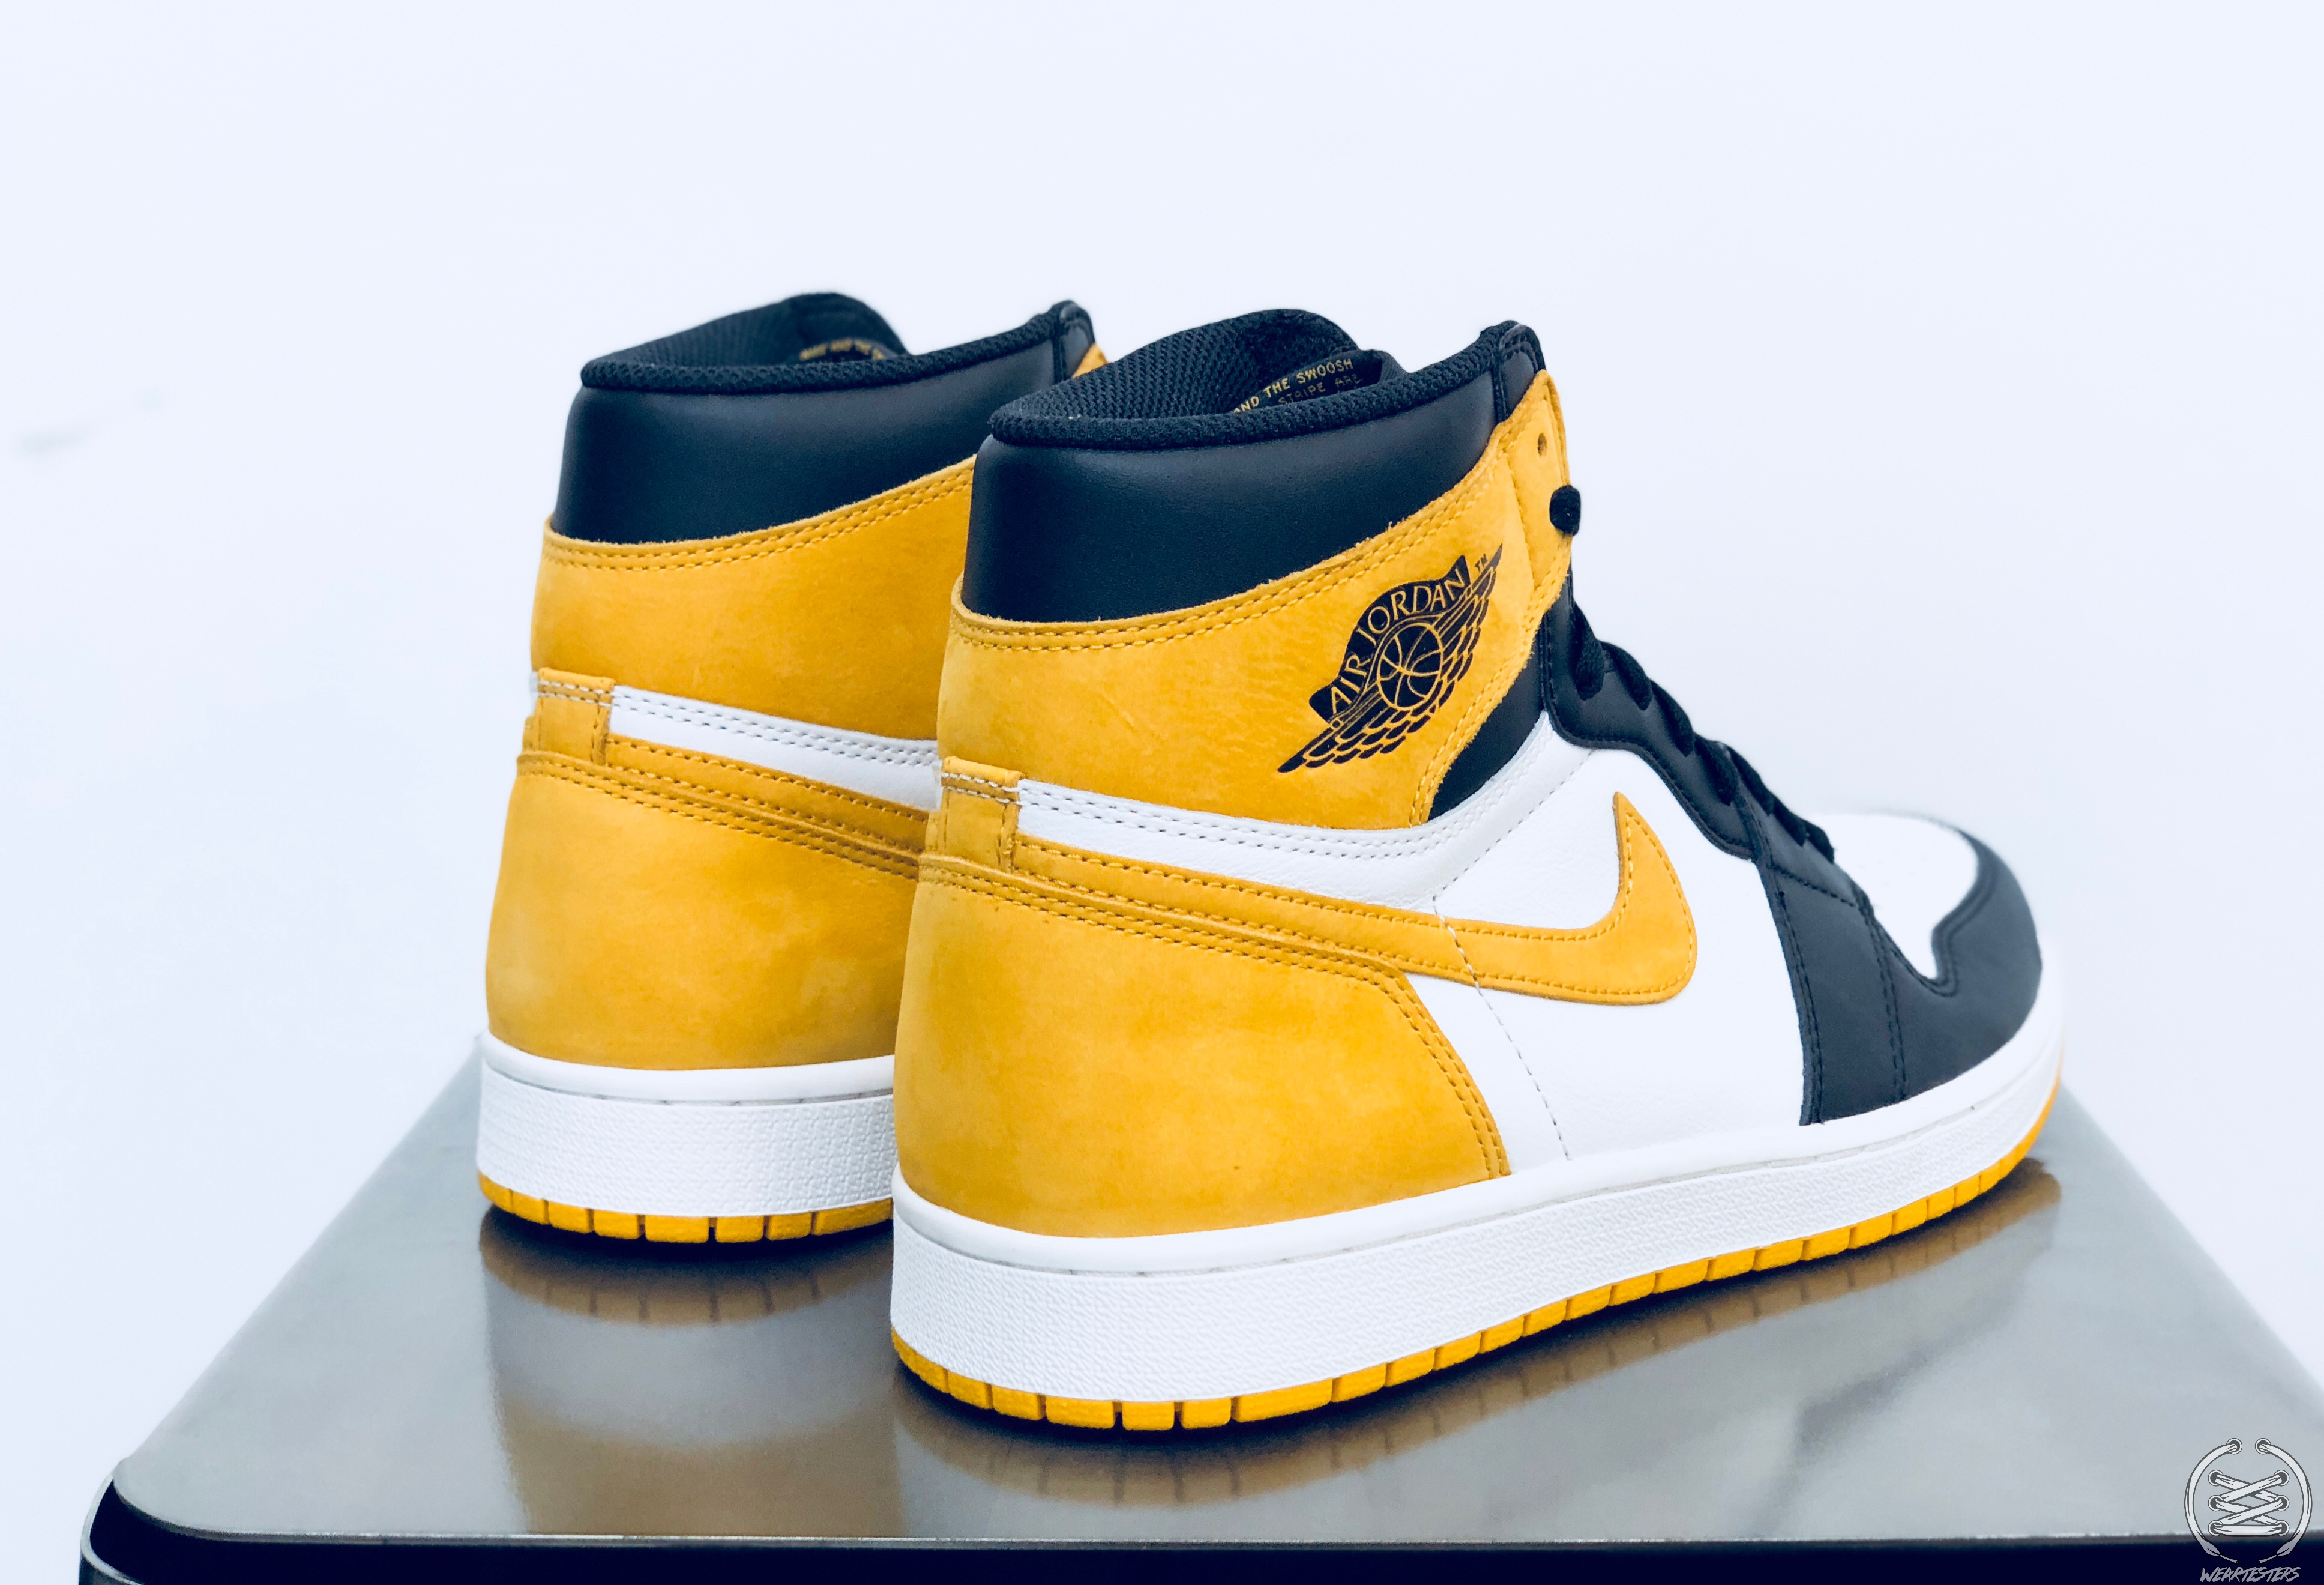 Air Jordan 1 Yellow Ochre Best Hand in the Game collection 3